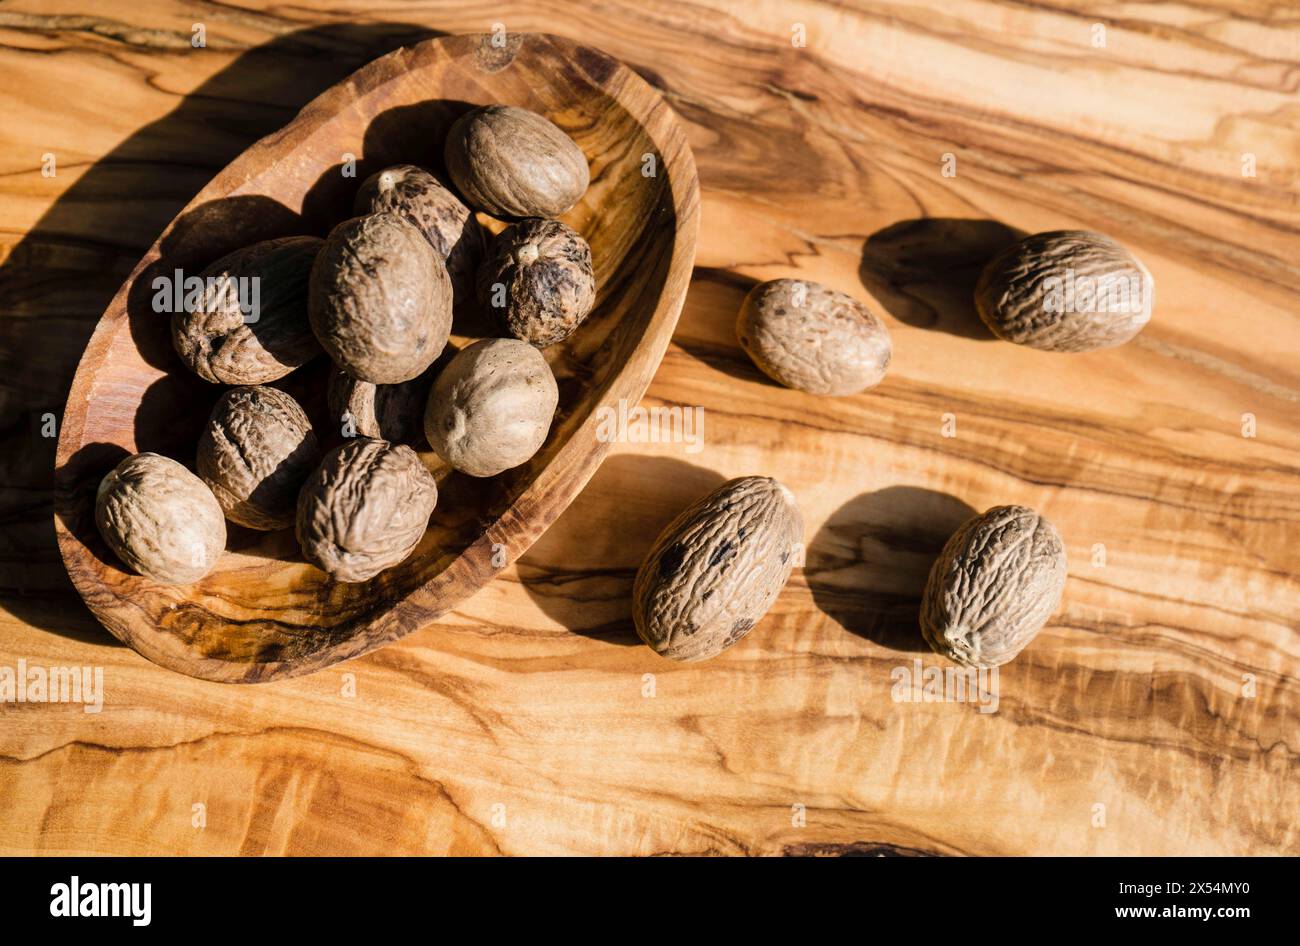 nutmeg, mace (Myristica fragrans), nutmegs in a wooden bowl on a wooden table Stock Photo